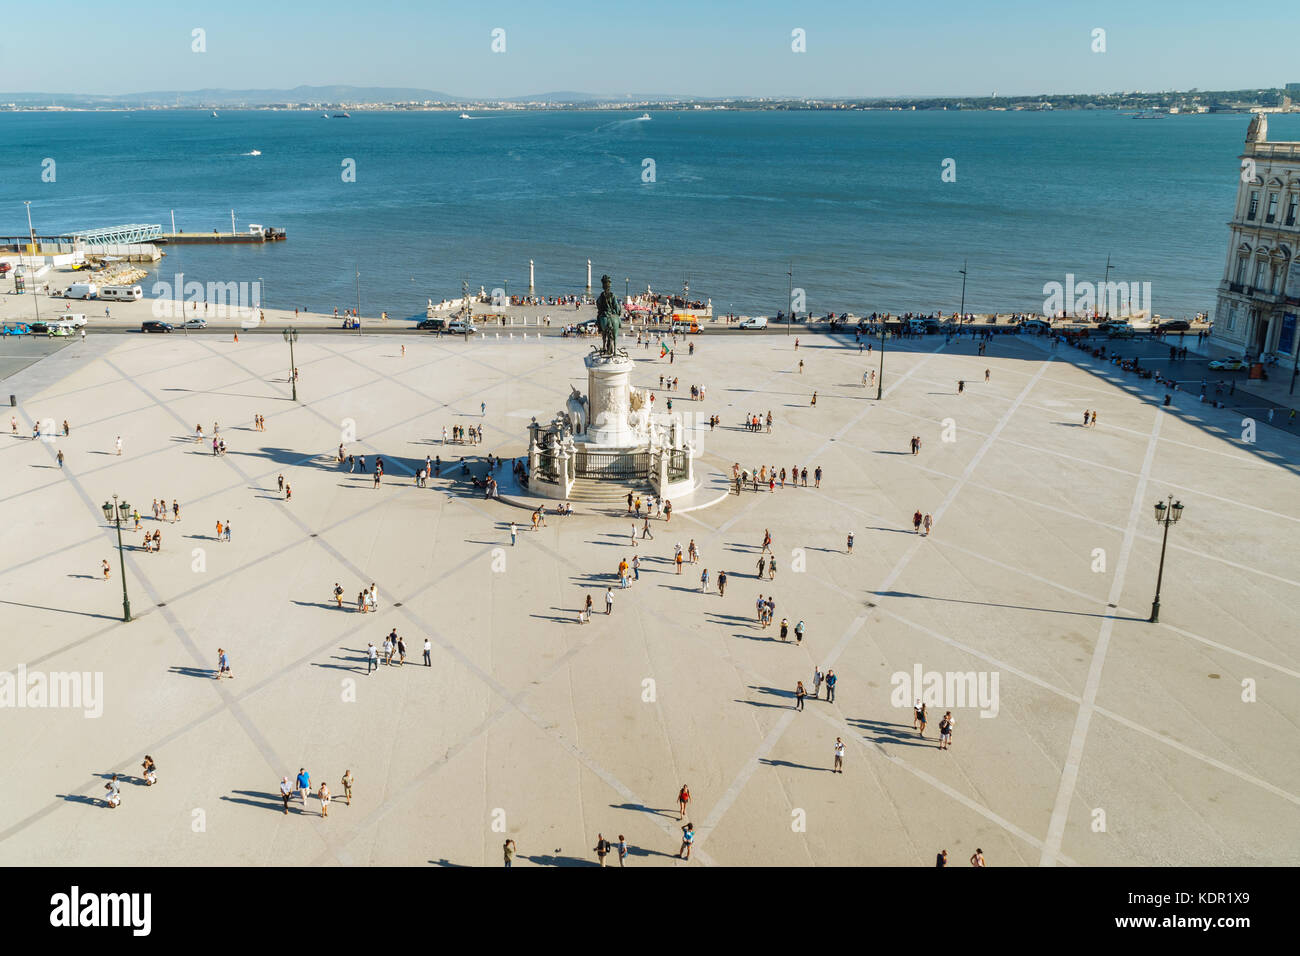 LISBON, PORTUGAL - AUGUST 11, 2017: Praca do Comercio (Commerce Square or Terreiro do Paco) is situated near the Tagus river Stock Photo